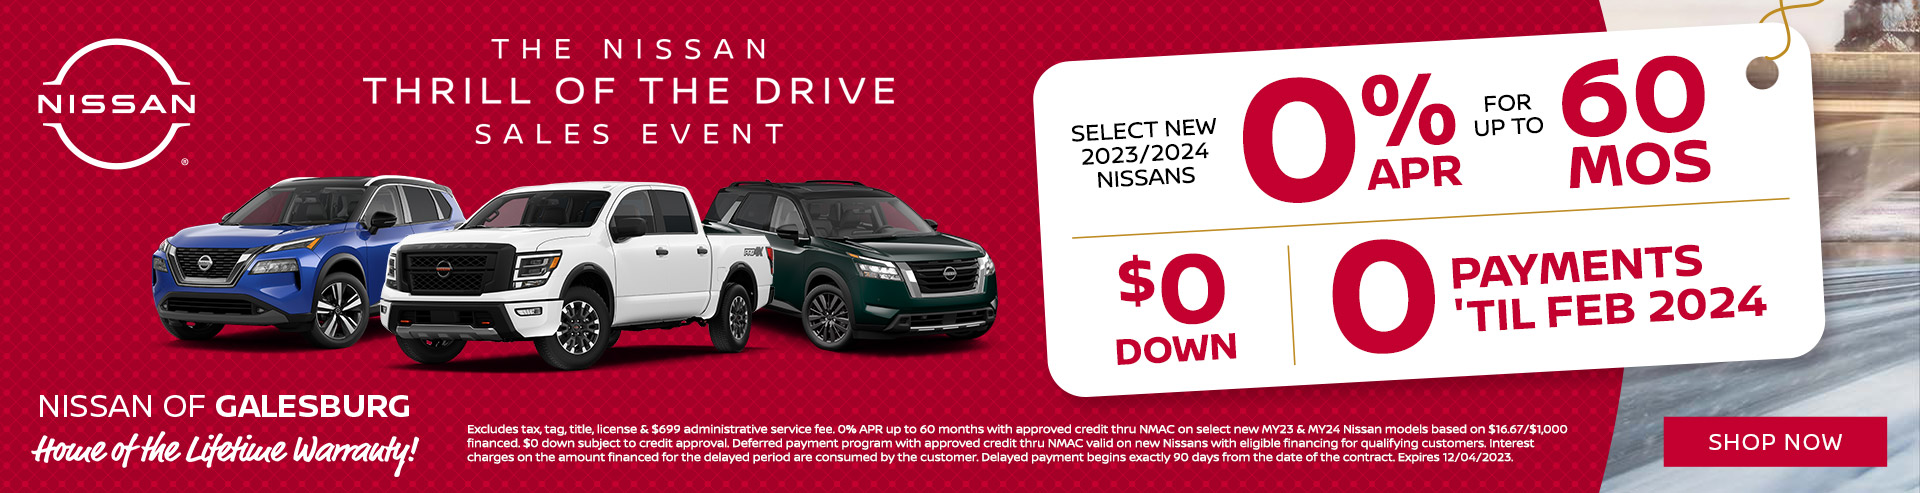 Select New 2023/2024 Nissans | Nissan of Galesburg | Galesburg, IL